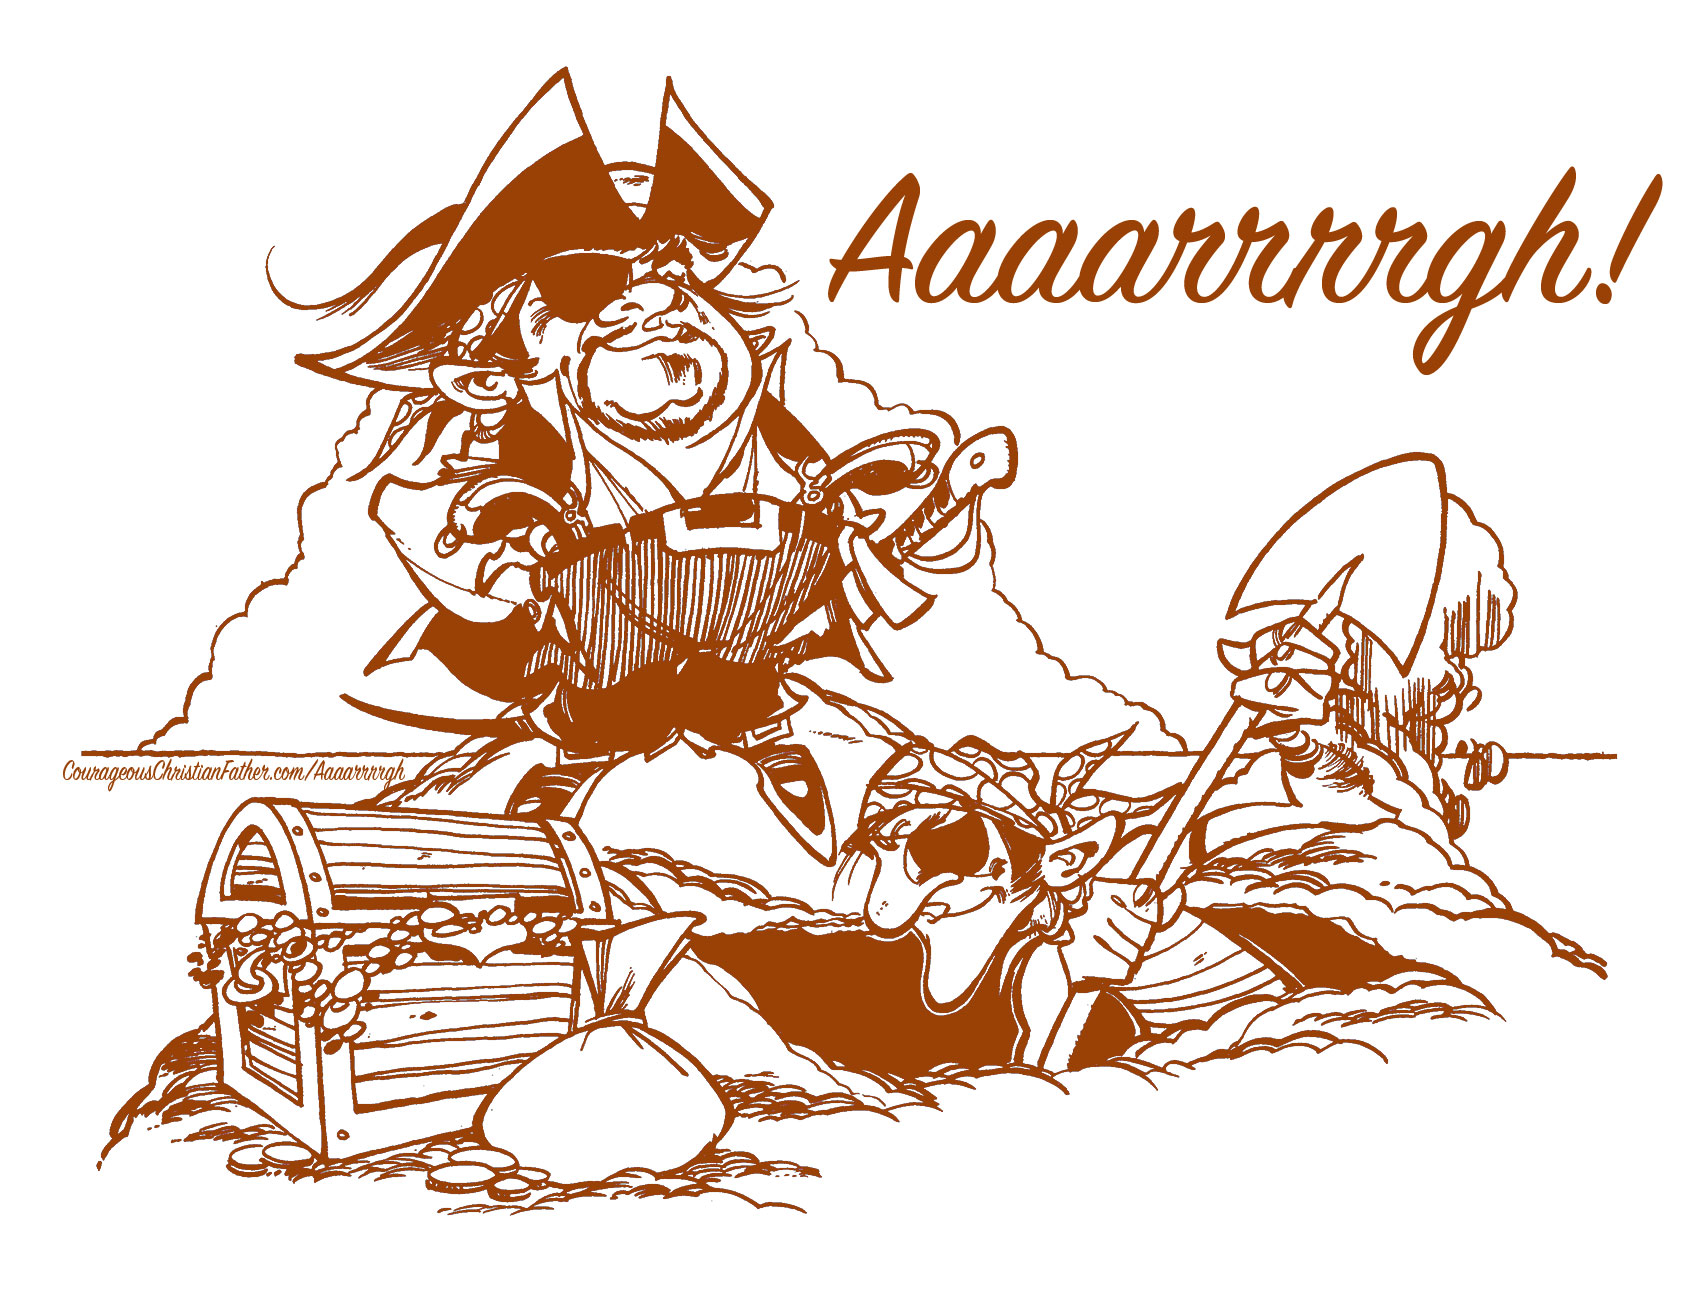 Aaaarrrrgh! - I saw a blog post with that title when looking for blog post on pirates. #Aaaarrrrgh